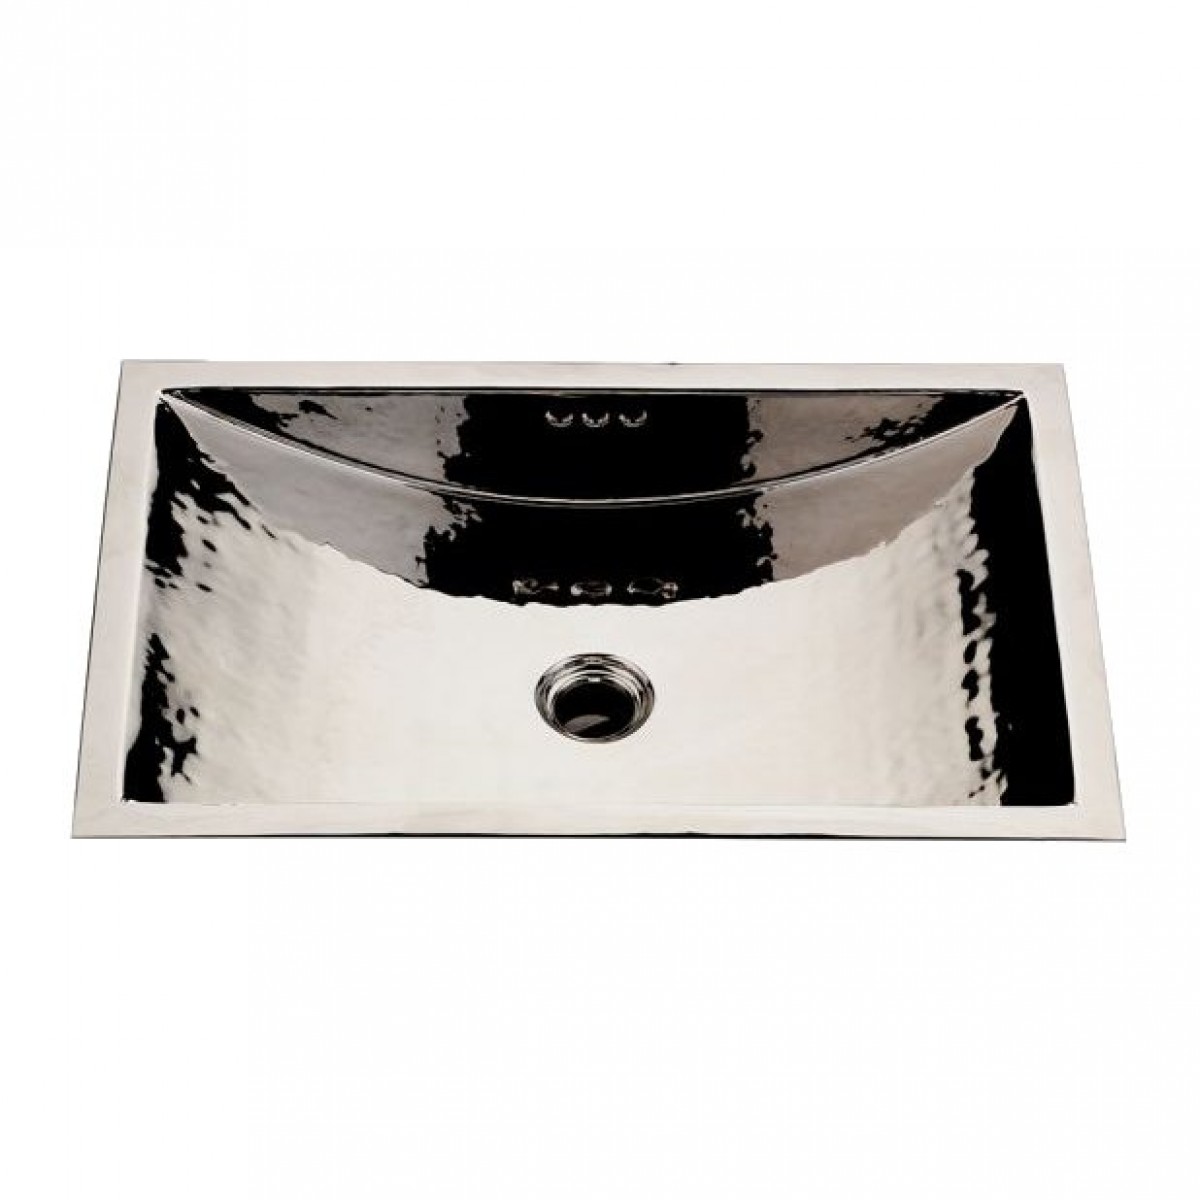 Normandy Drop In or Undermount Rectangular Hammered Copper Lavatory Sink 22 13/16" x 14 3/4" x 5 11/16" | Highlight image